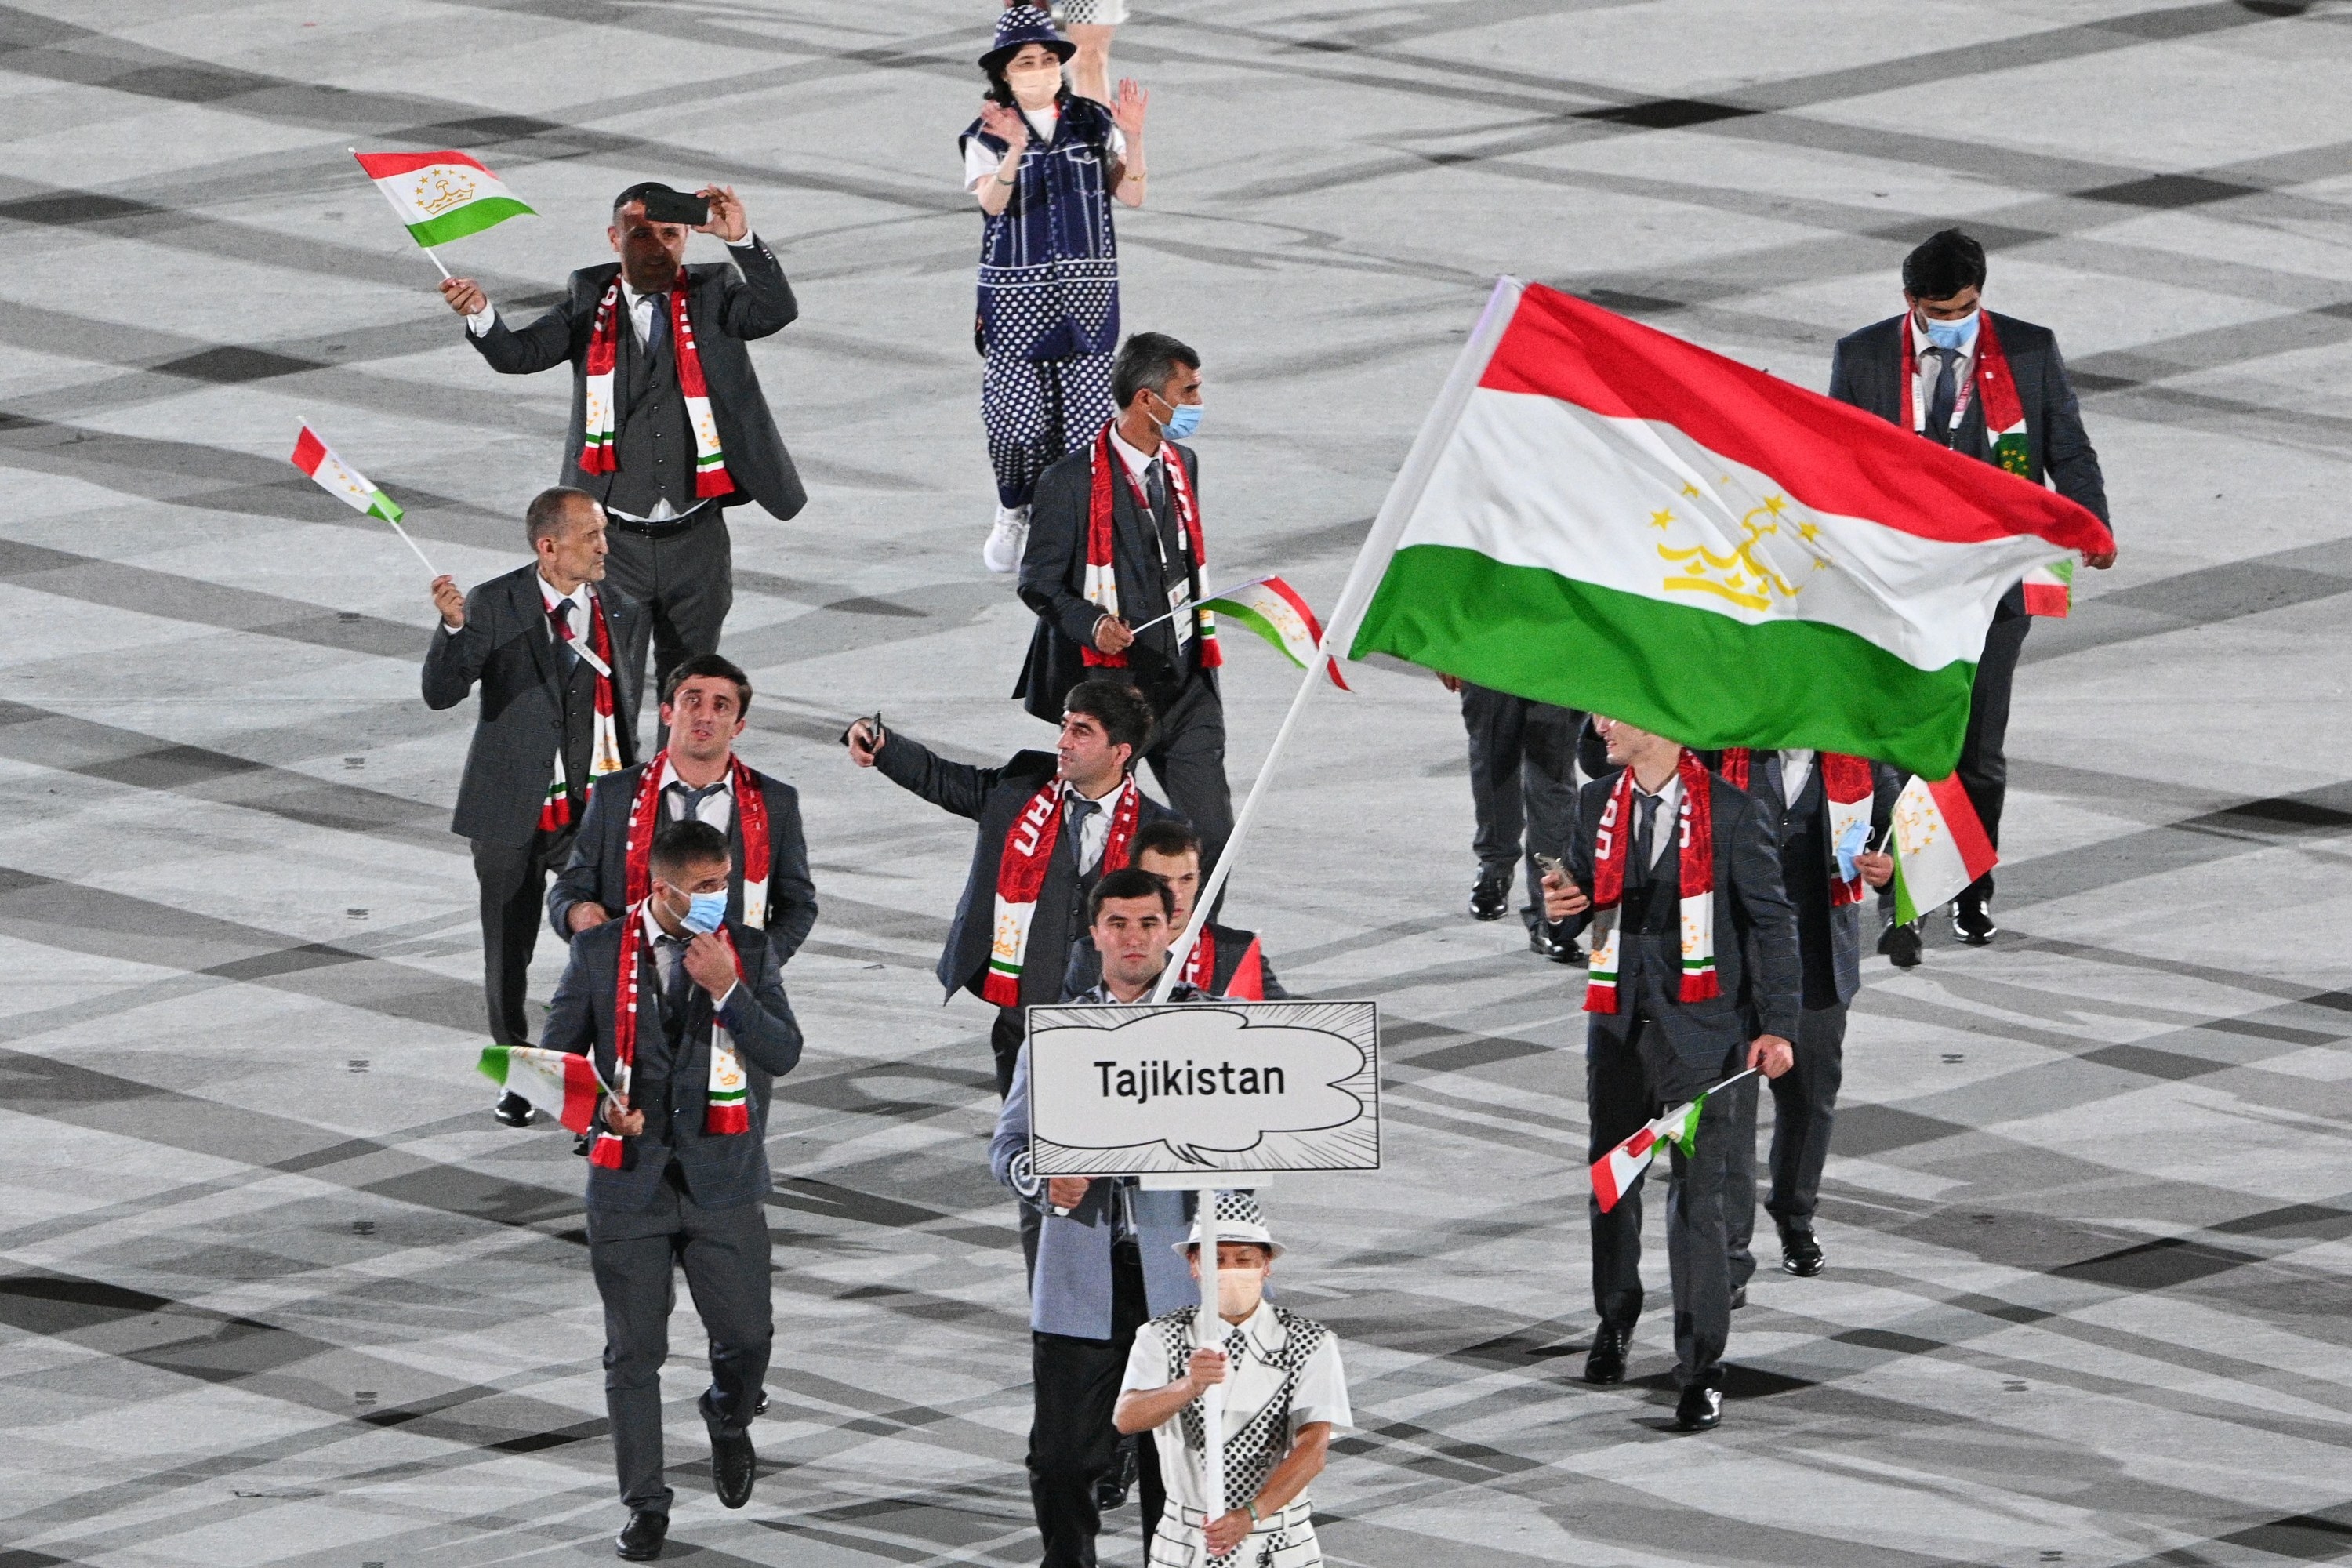 The athletes wore suits and scarves that matched the colors of their flag